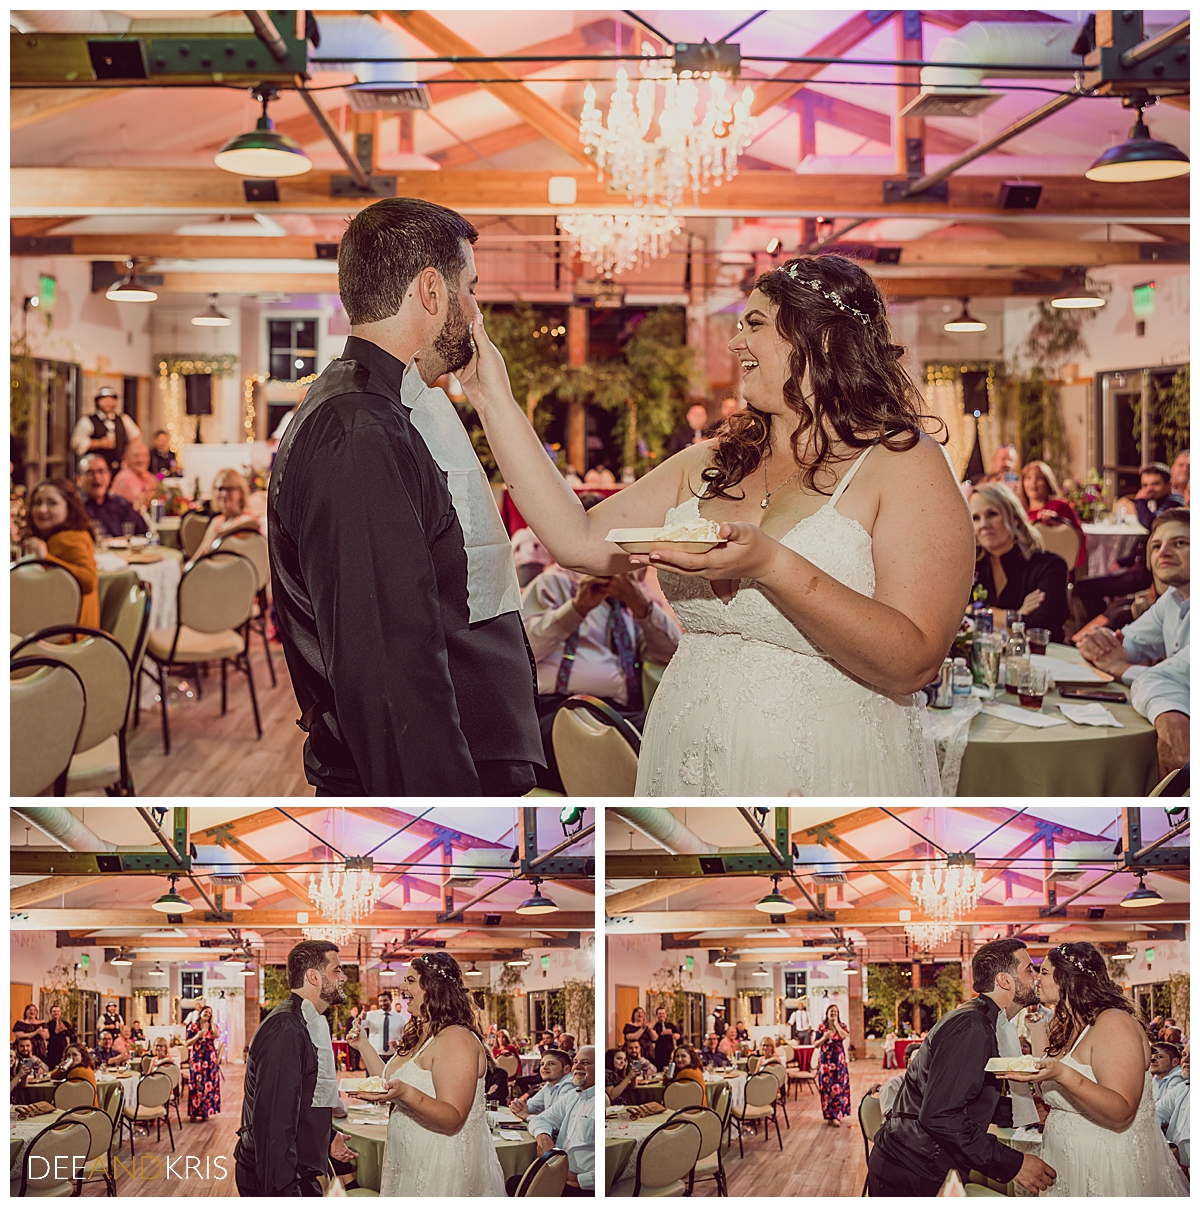 Three images: Top image of bride smashing cake in groom's face. Bottom left image of groom with cake on his face. Bottom right image of couple kissing after cake smash.